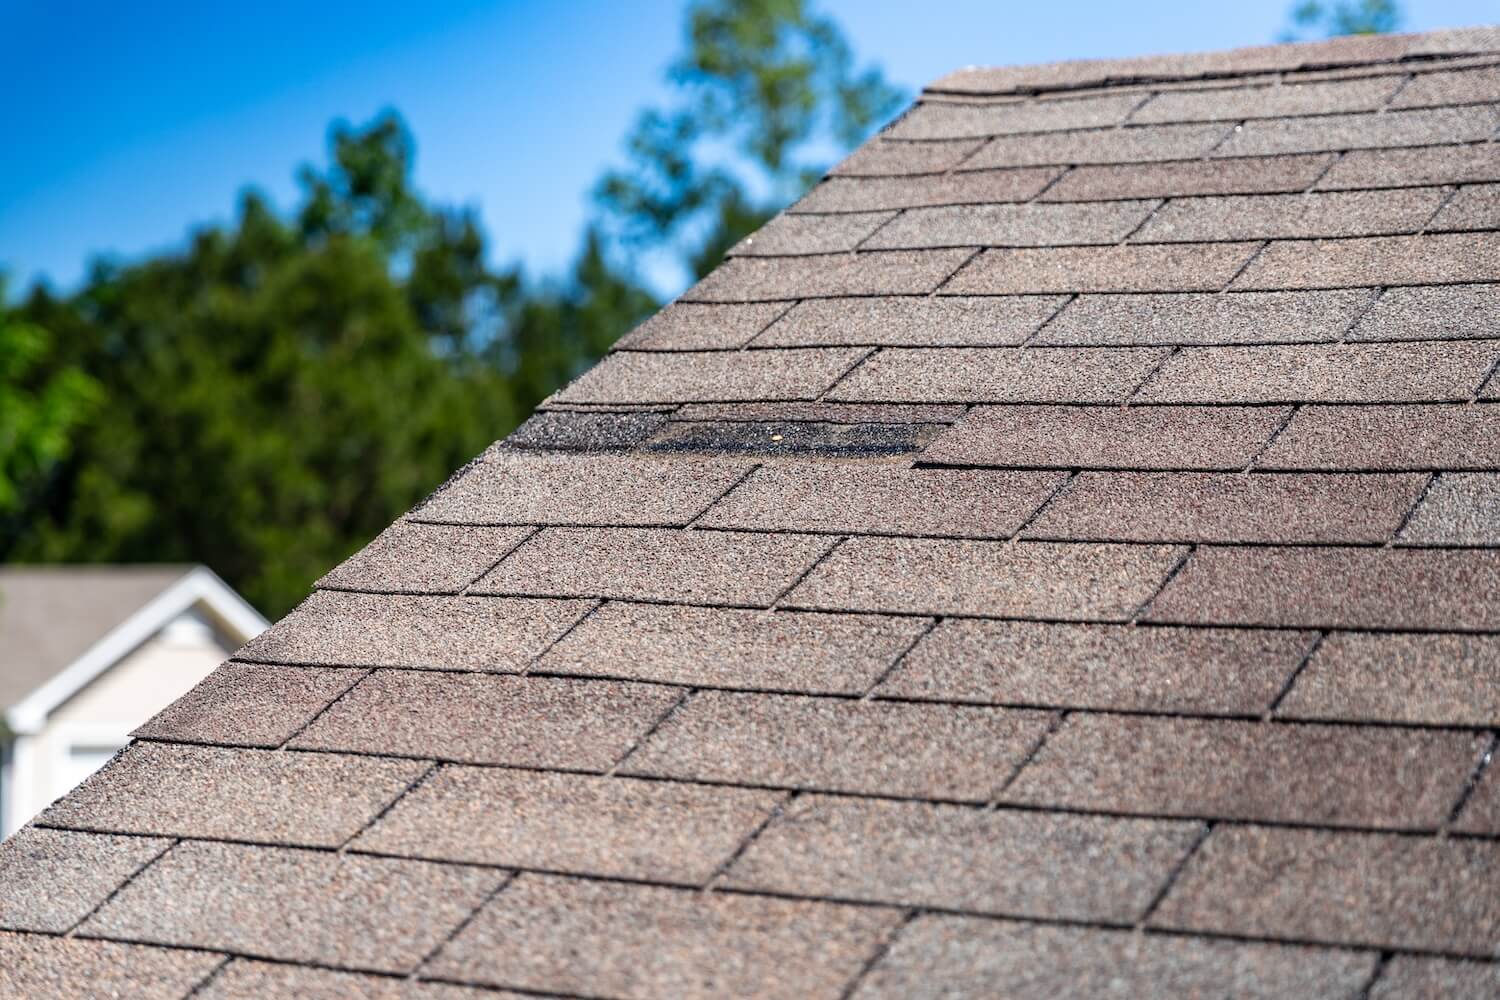 Protecting Your Investment The Importance Of Regular Roof Inspections